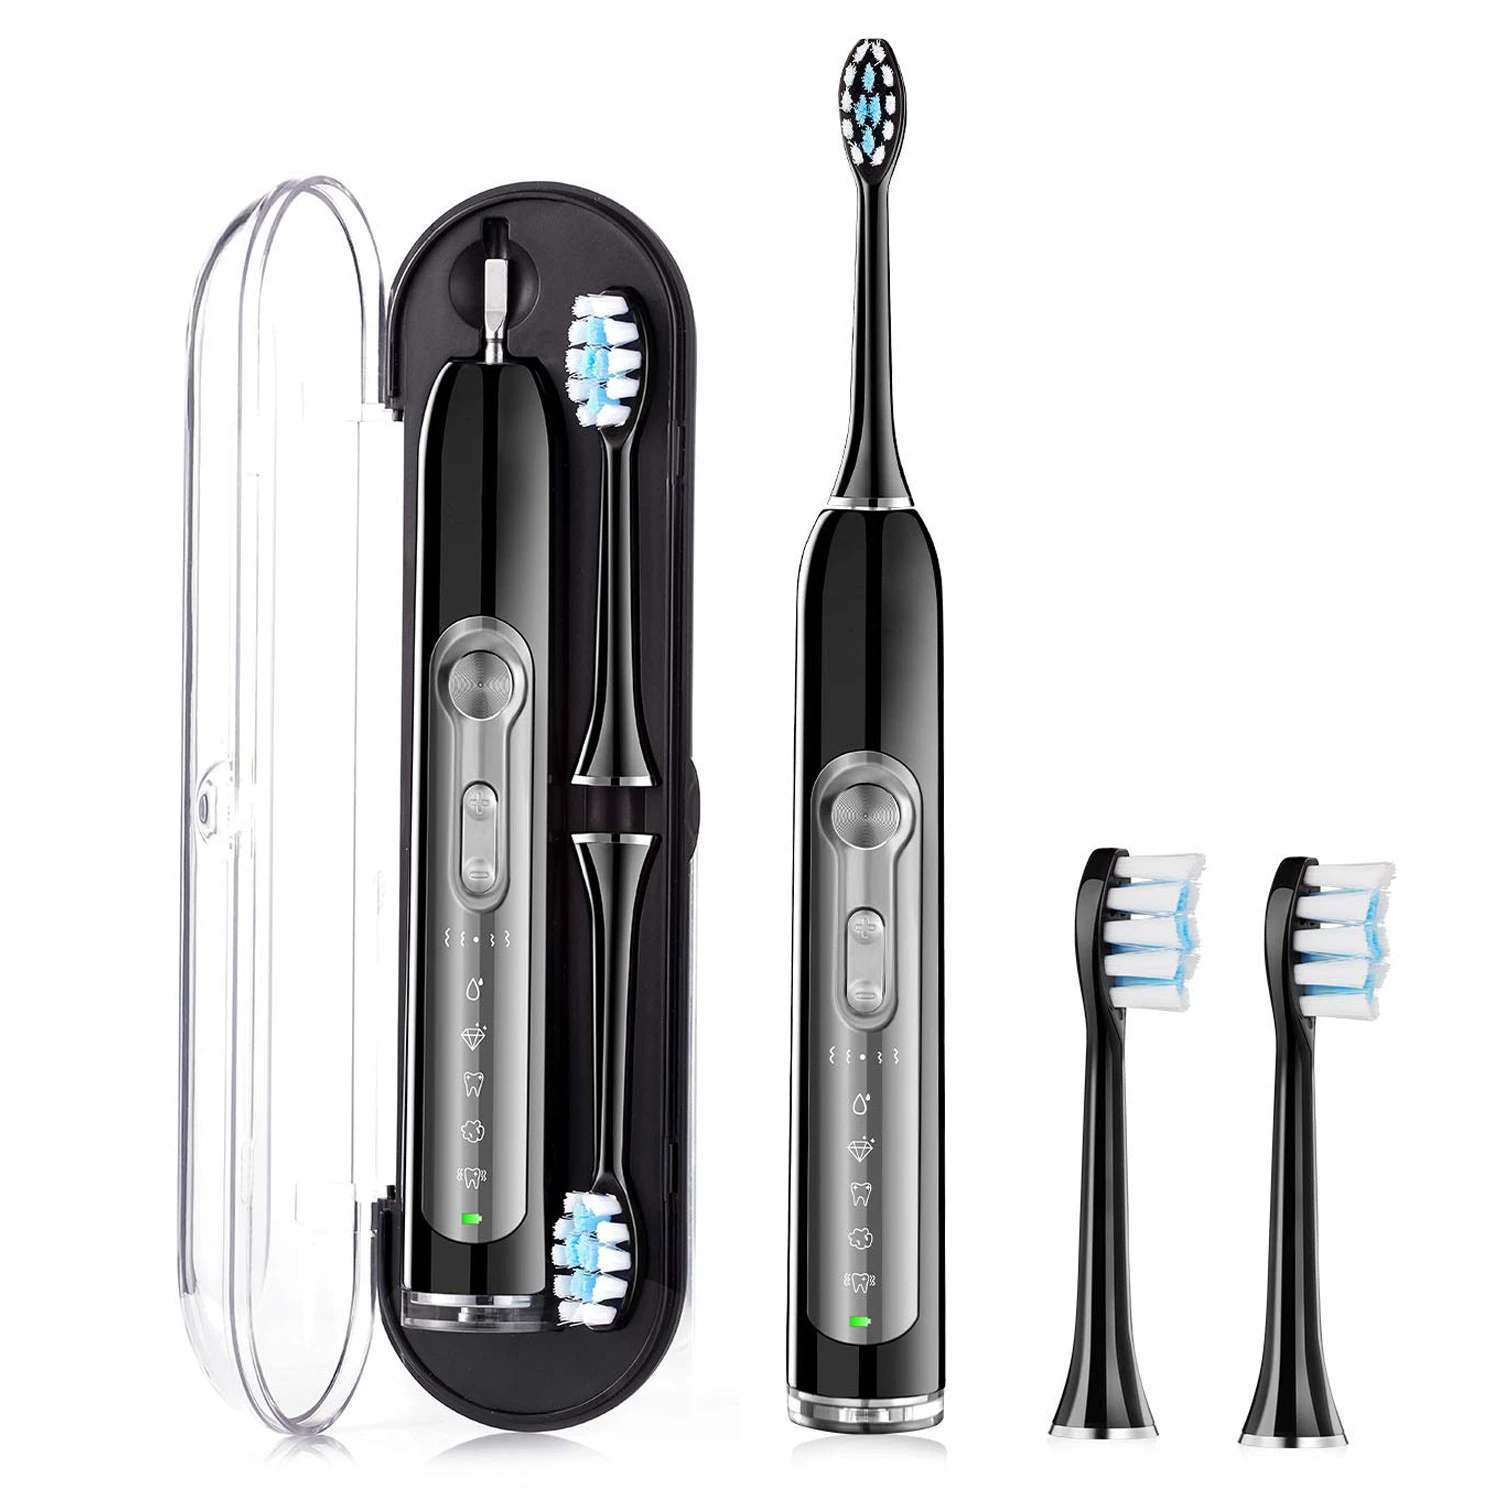 Upgraded Electrical Toothbrush with Travel Case, Rechargeable Sonic Toothbrush 5 Modes 3 Brush Heads Electronic Toothbrush